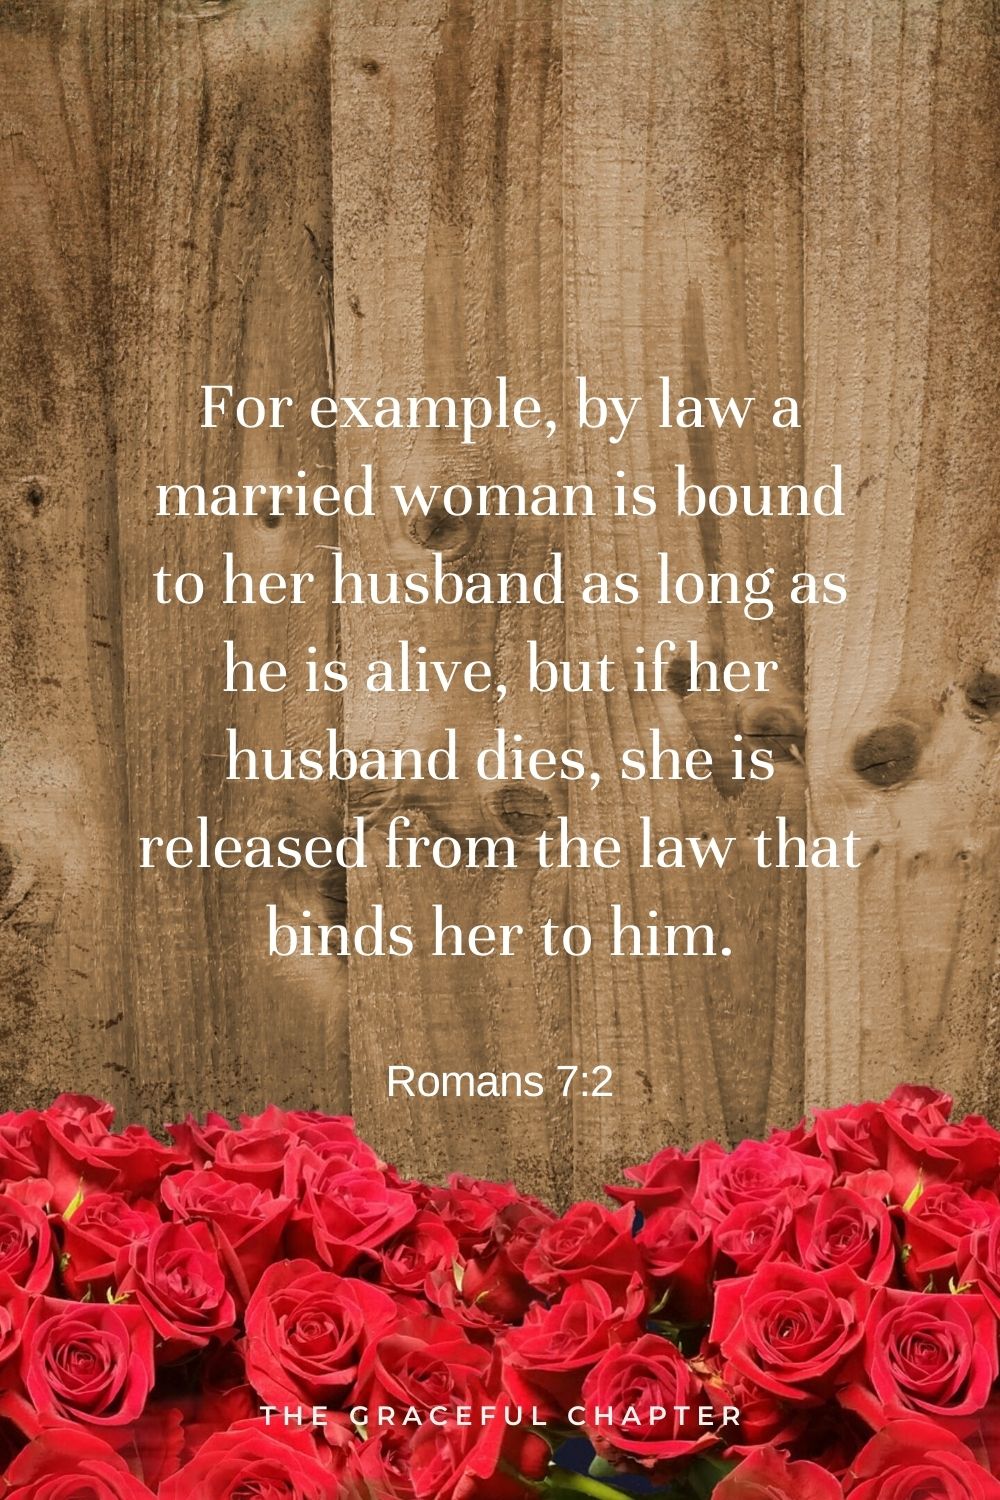 For example, by law a married woman is bound to her husband as long as he is alive, but if her husband dies, she is released from the law that binds her to him. Romans 7:2